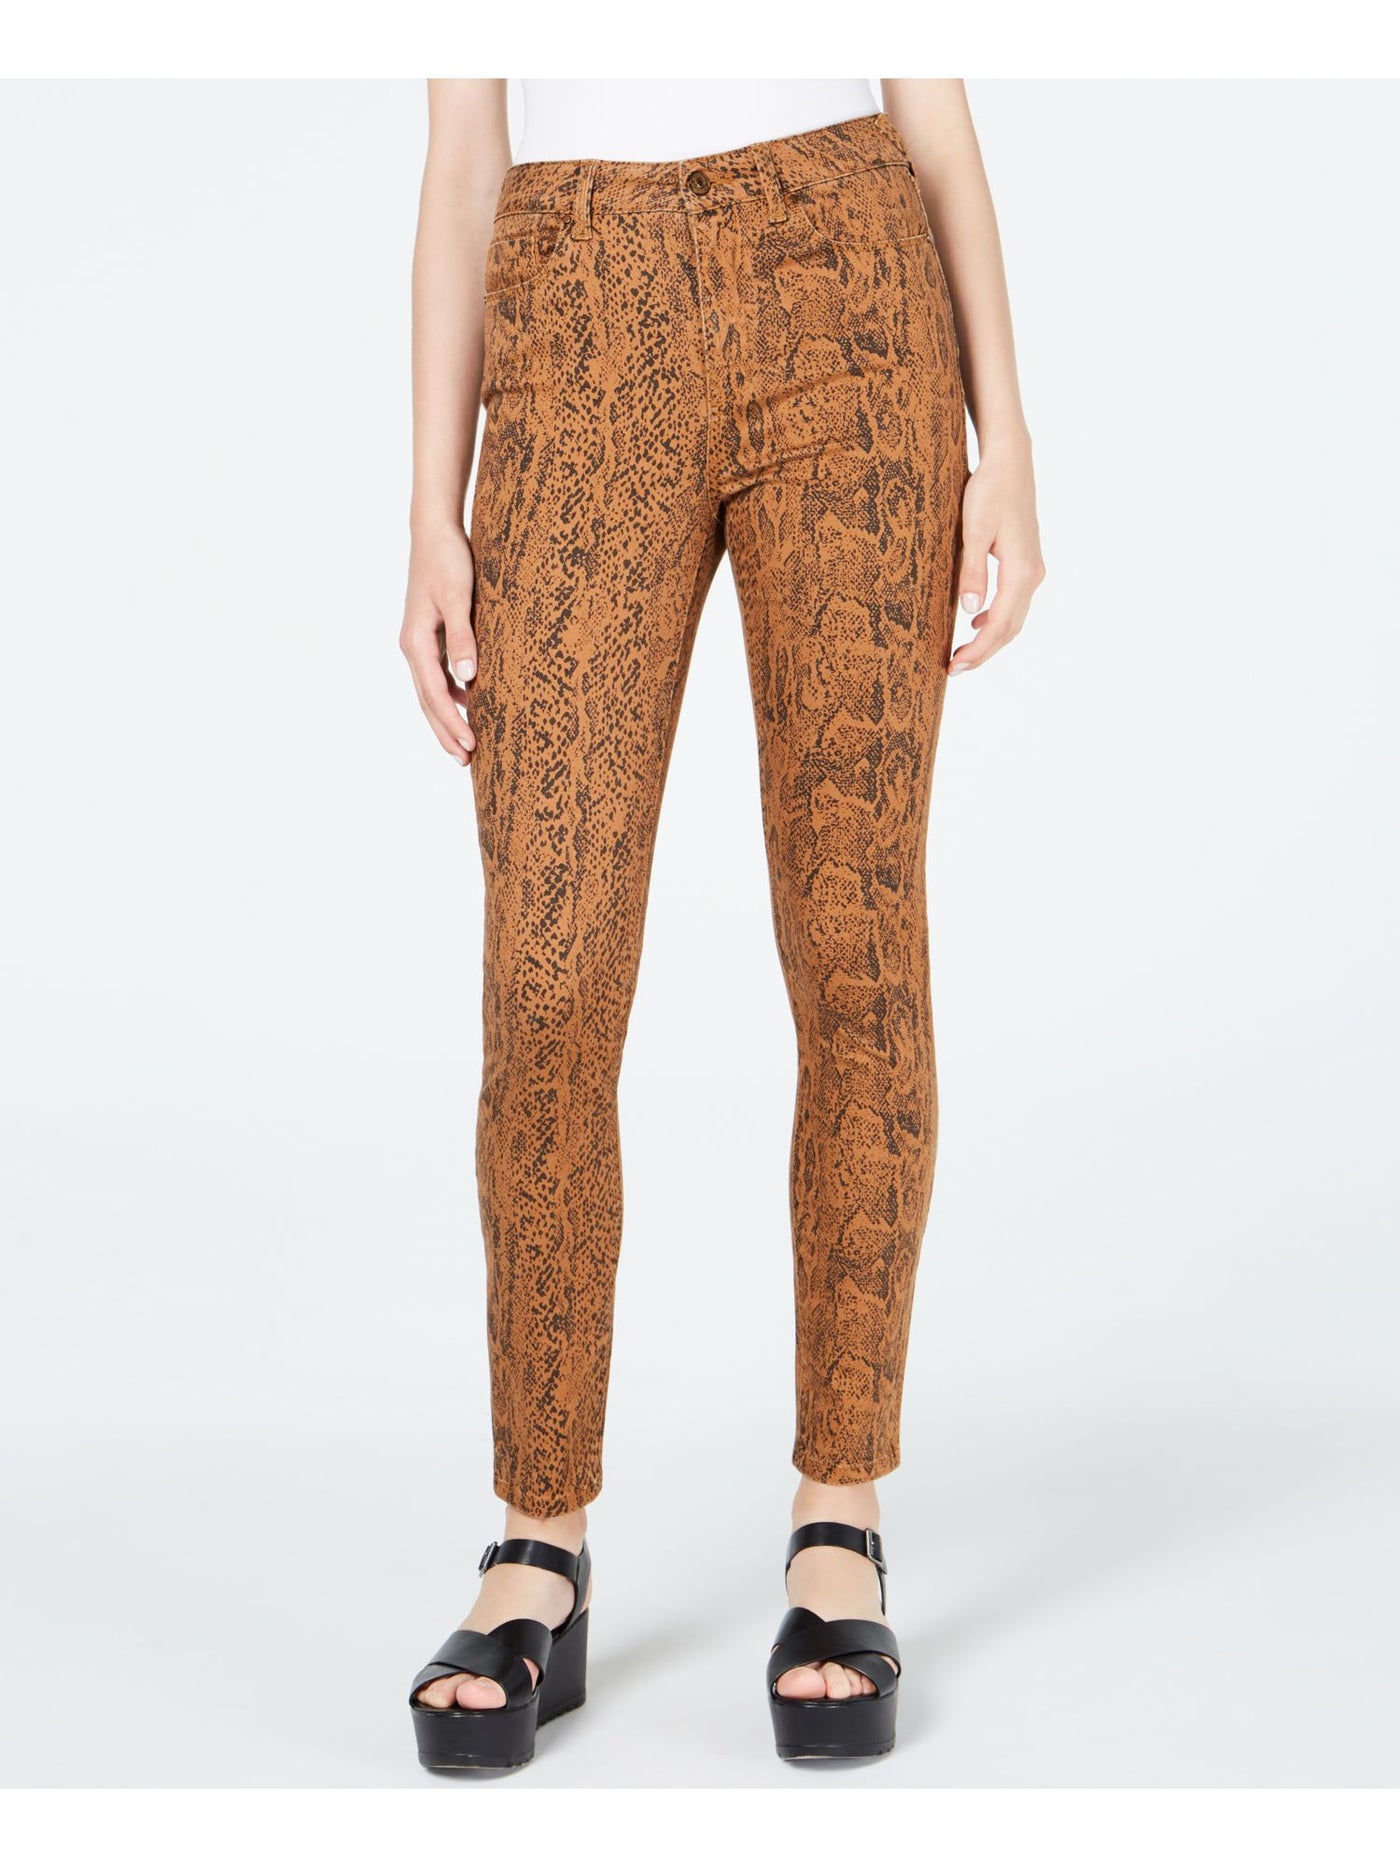 4 WHAT ITS WORTH Womens Brown Printed Pants Size: 1